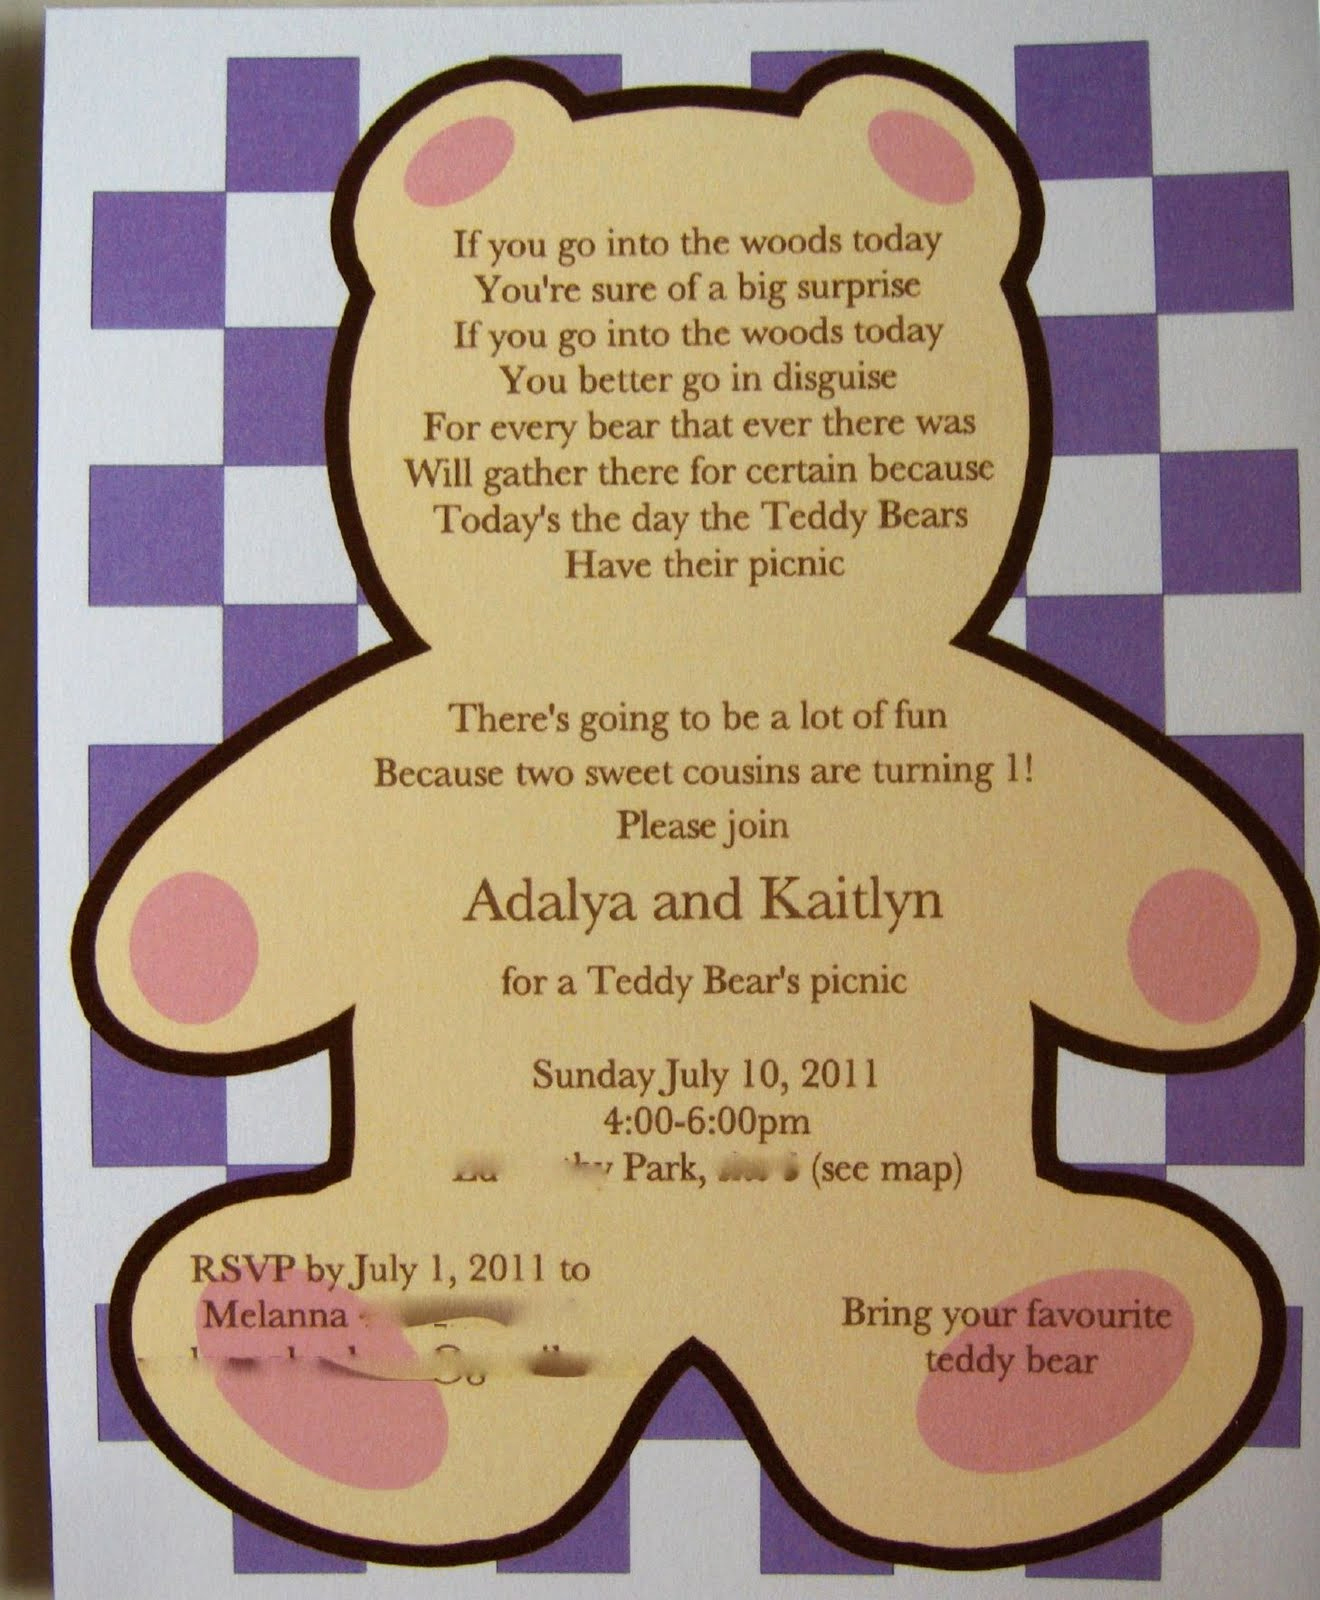 Teddy Bears Picnic Invitation New Rhapsody Of Cacophony if You Go Into the Woods today